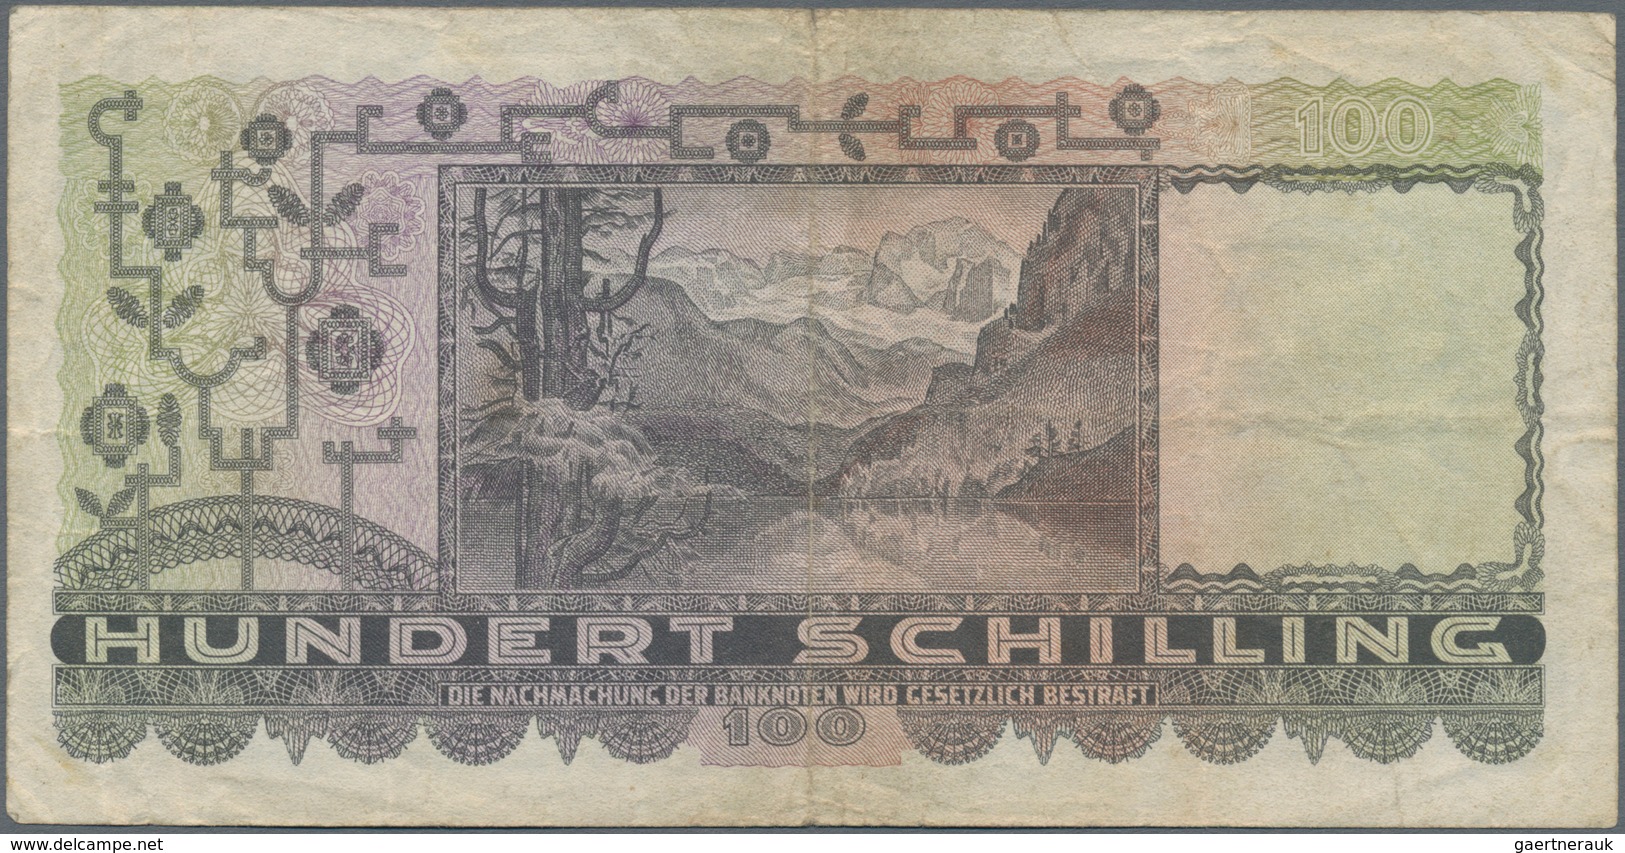 Austria / Österreich: 100 Schilling 1947, P.124, Lightly Stained Paper With Tiny Border Tears. Condi - Autriche